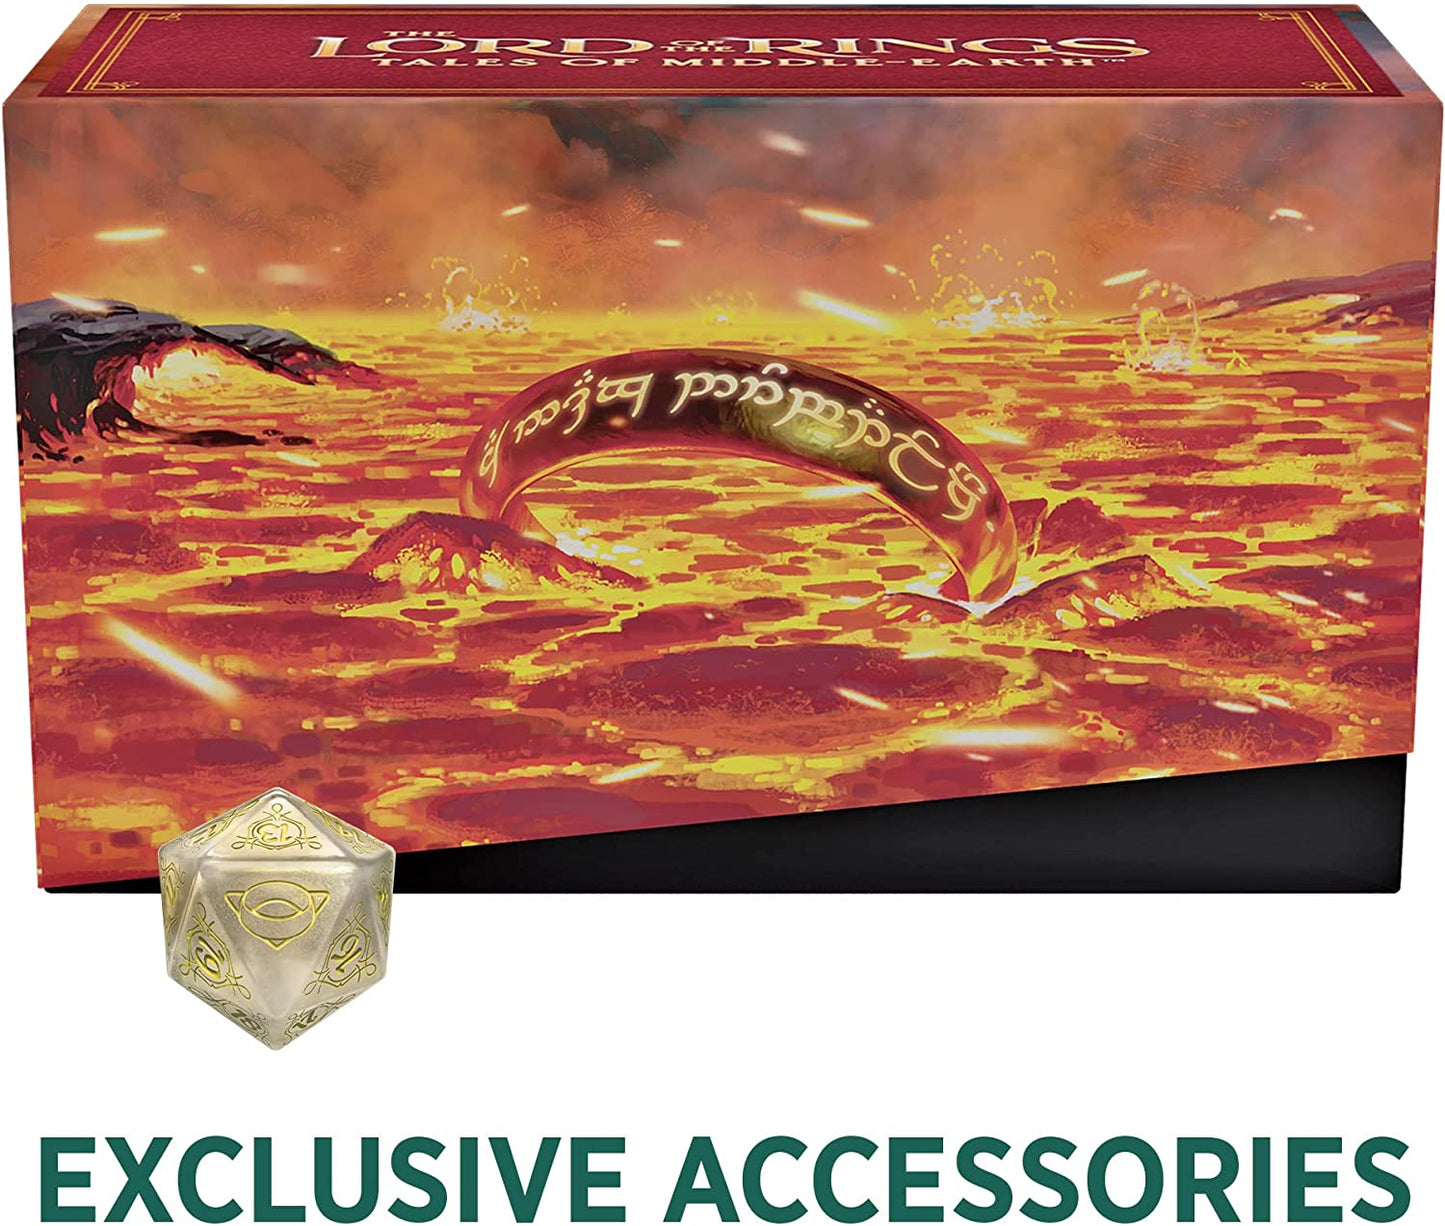 MTG: Lord of the Rings Bundle